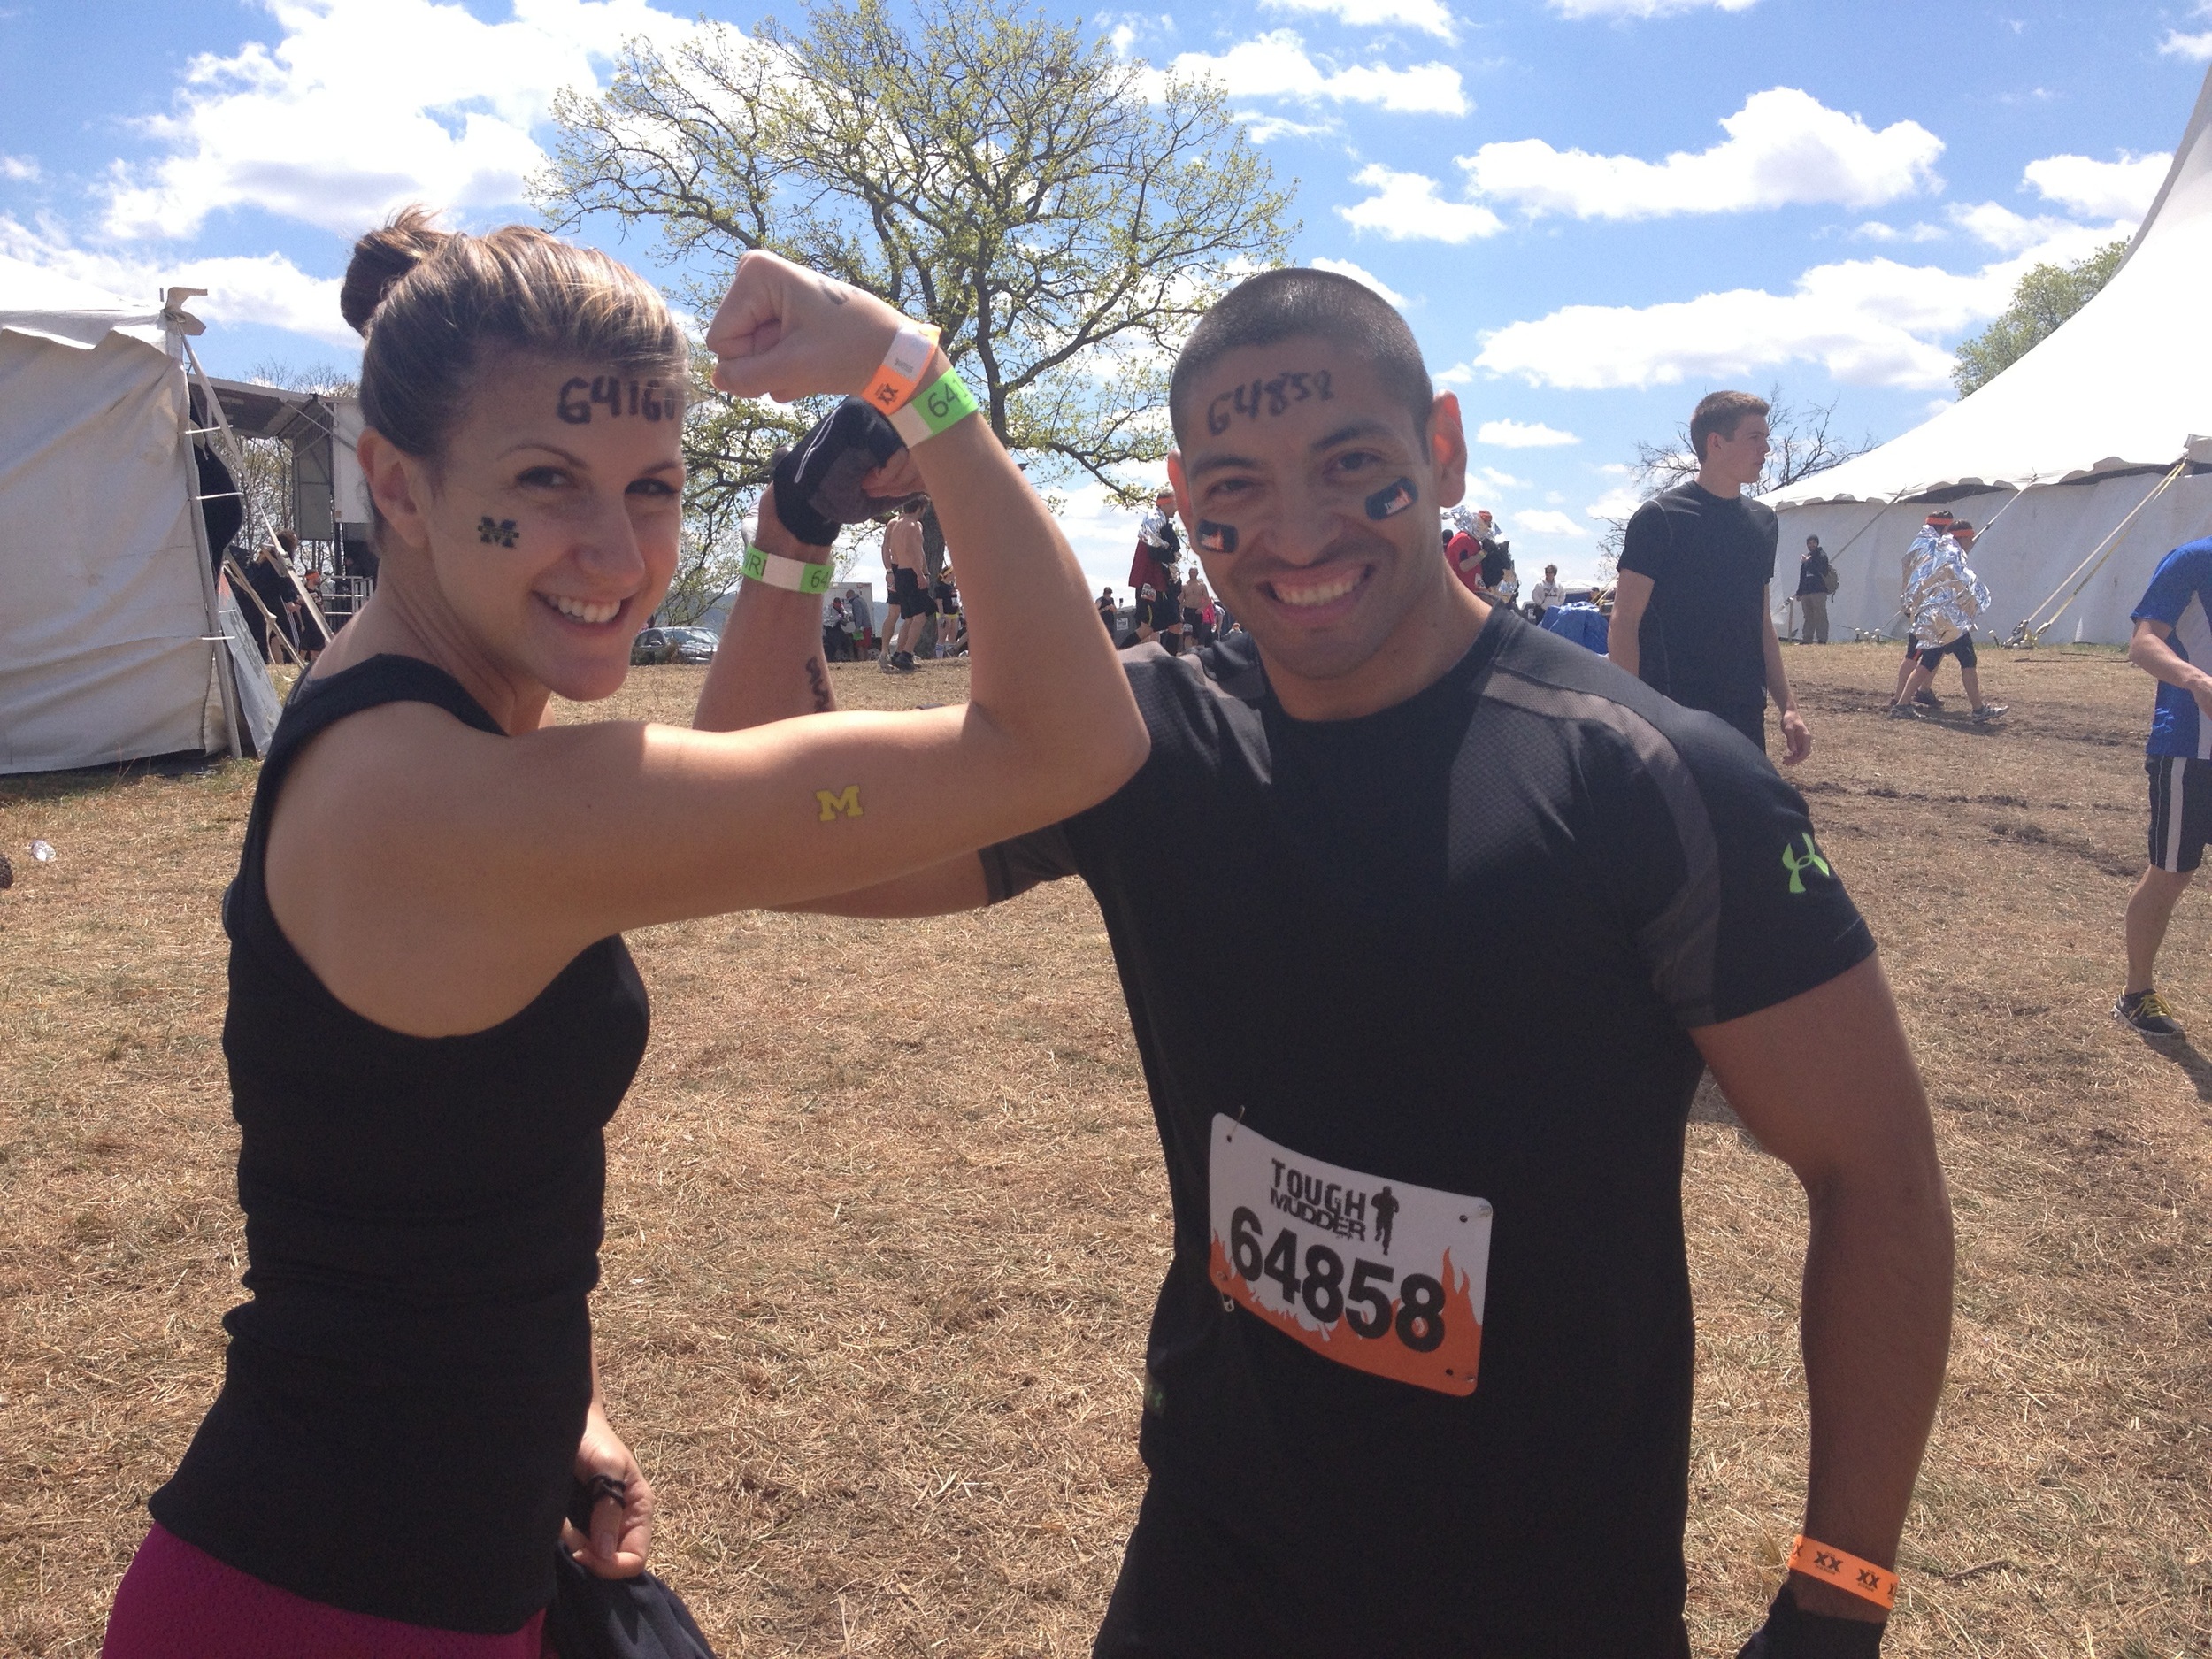  Leslie and Antonio. I recommend having a chick from Detroit and a Marine, respectively, on your Tough Mudder team.​ 